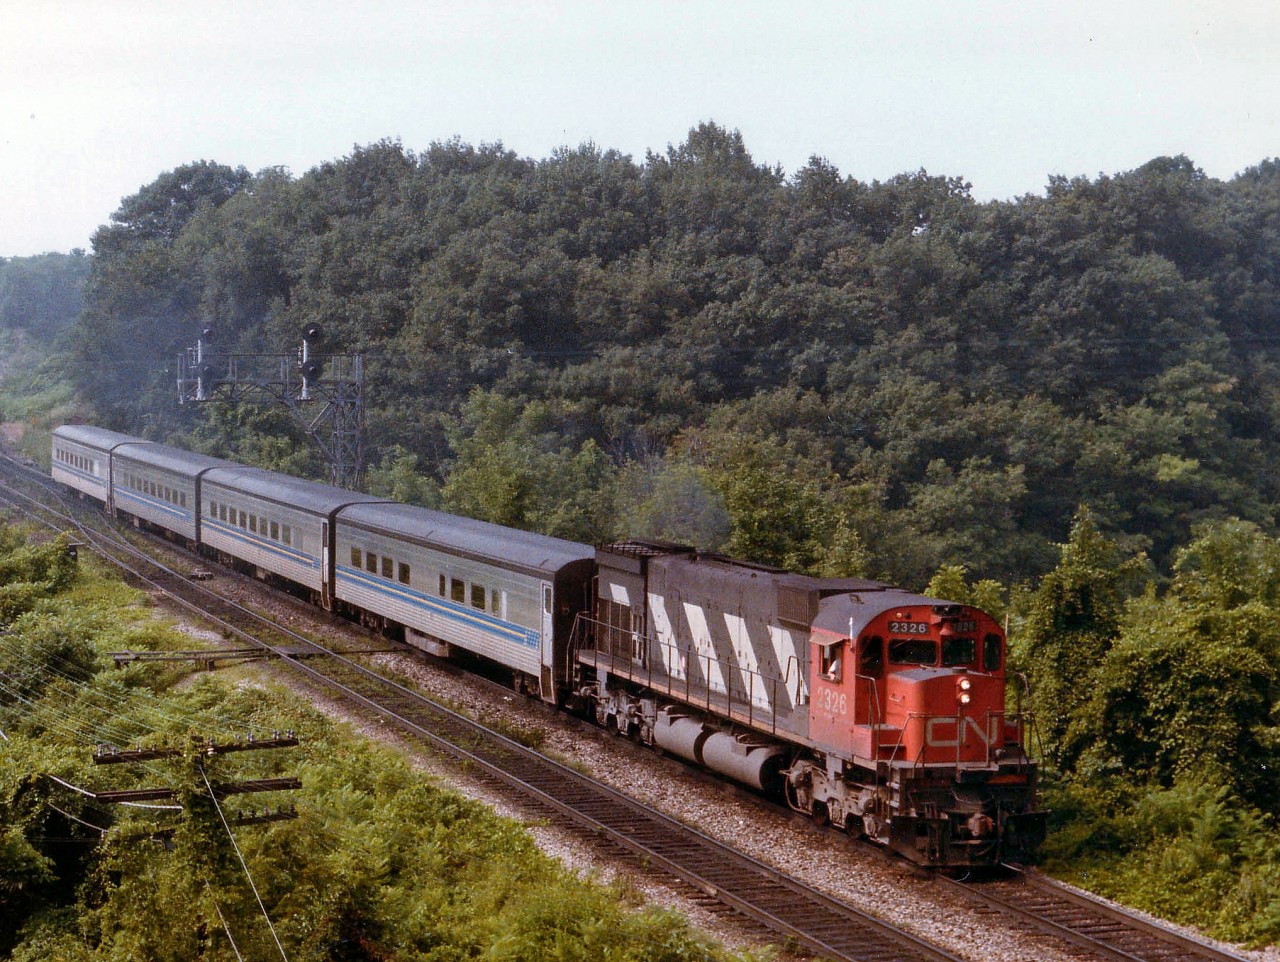 It is a steamy hot and hazy August morning and this comes down the hill at Bayview heading East. I marked it as #80, the morning VIA, but I cannot recall now whether this train  had a baggage car or not. I keep thinking it was always a 5 car train.  And the unusual leader, MLW M-636 #2326, has 'extra' flags. What gives?  Yes, we know it is extra unusual and the probable Tempo engine of the day has crapped out somewhere. One thing for sure, railfans even back then no doubt would pay a tad extra to ride behind this behemoth just to listen to her work.  Unit was retired by 1996.